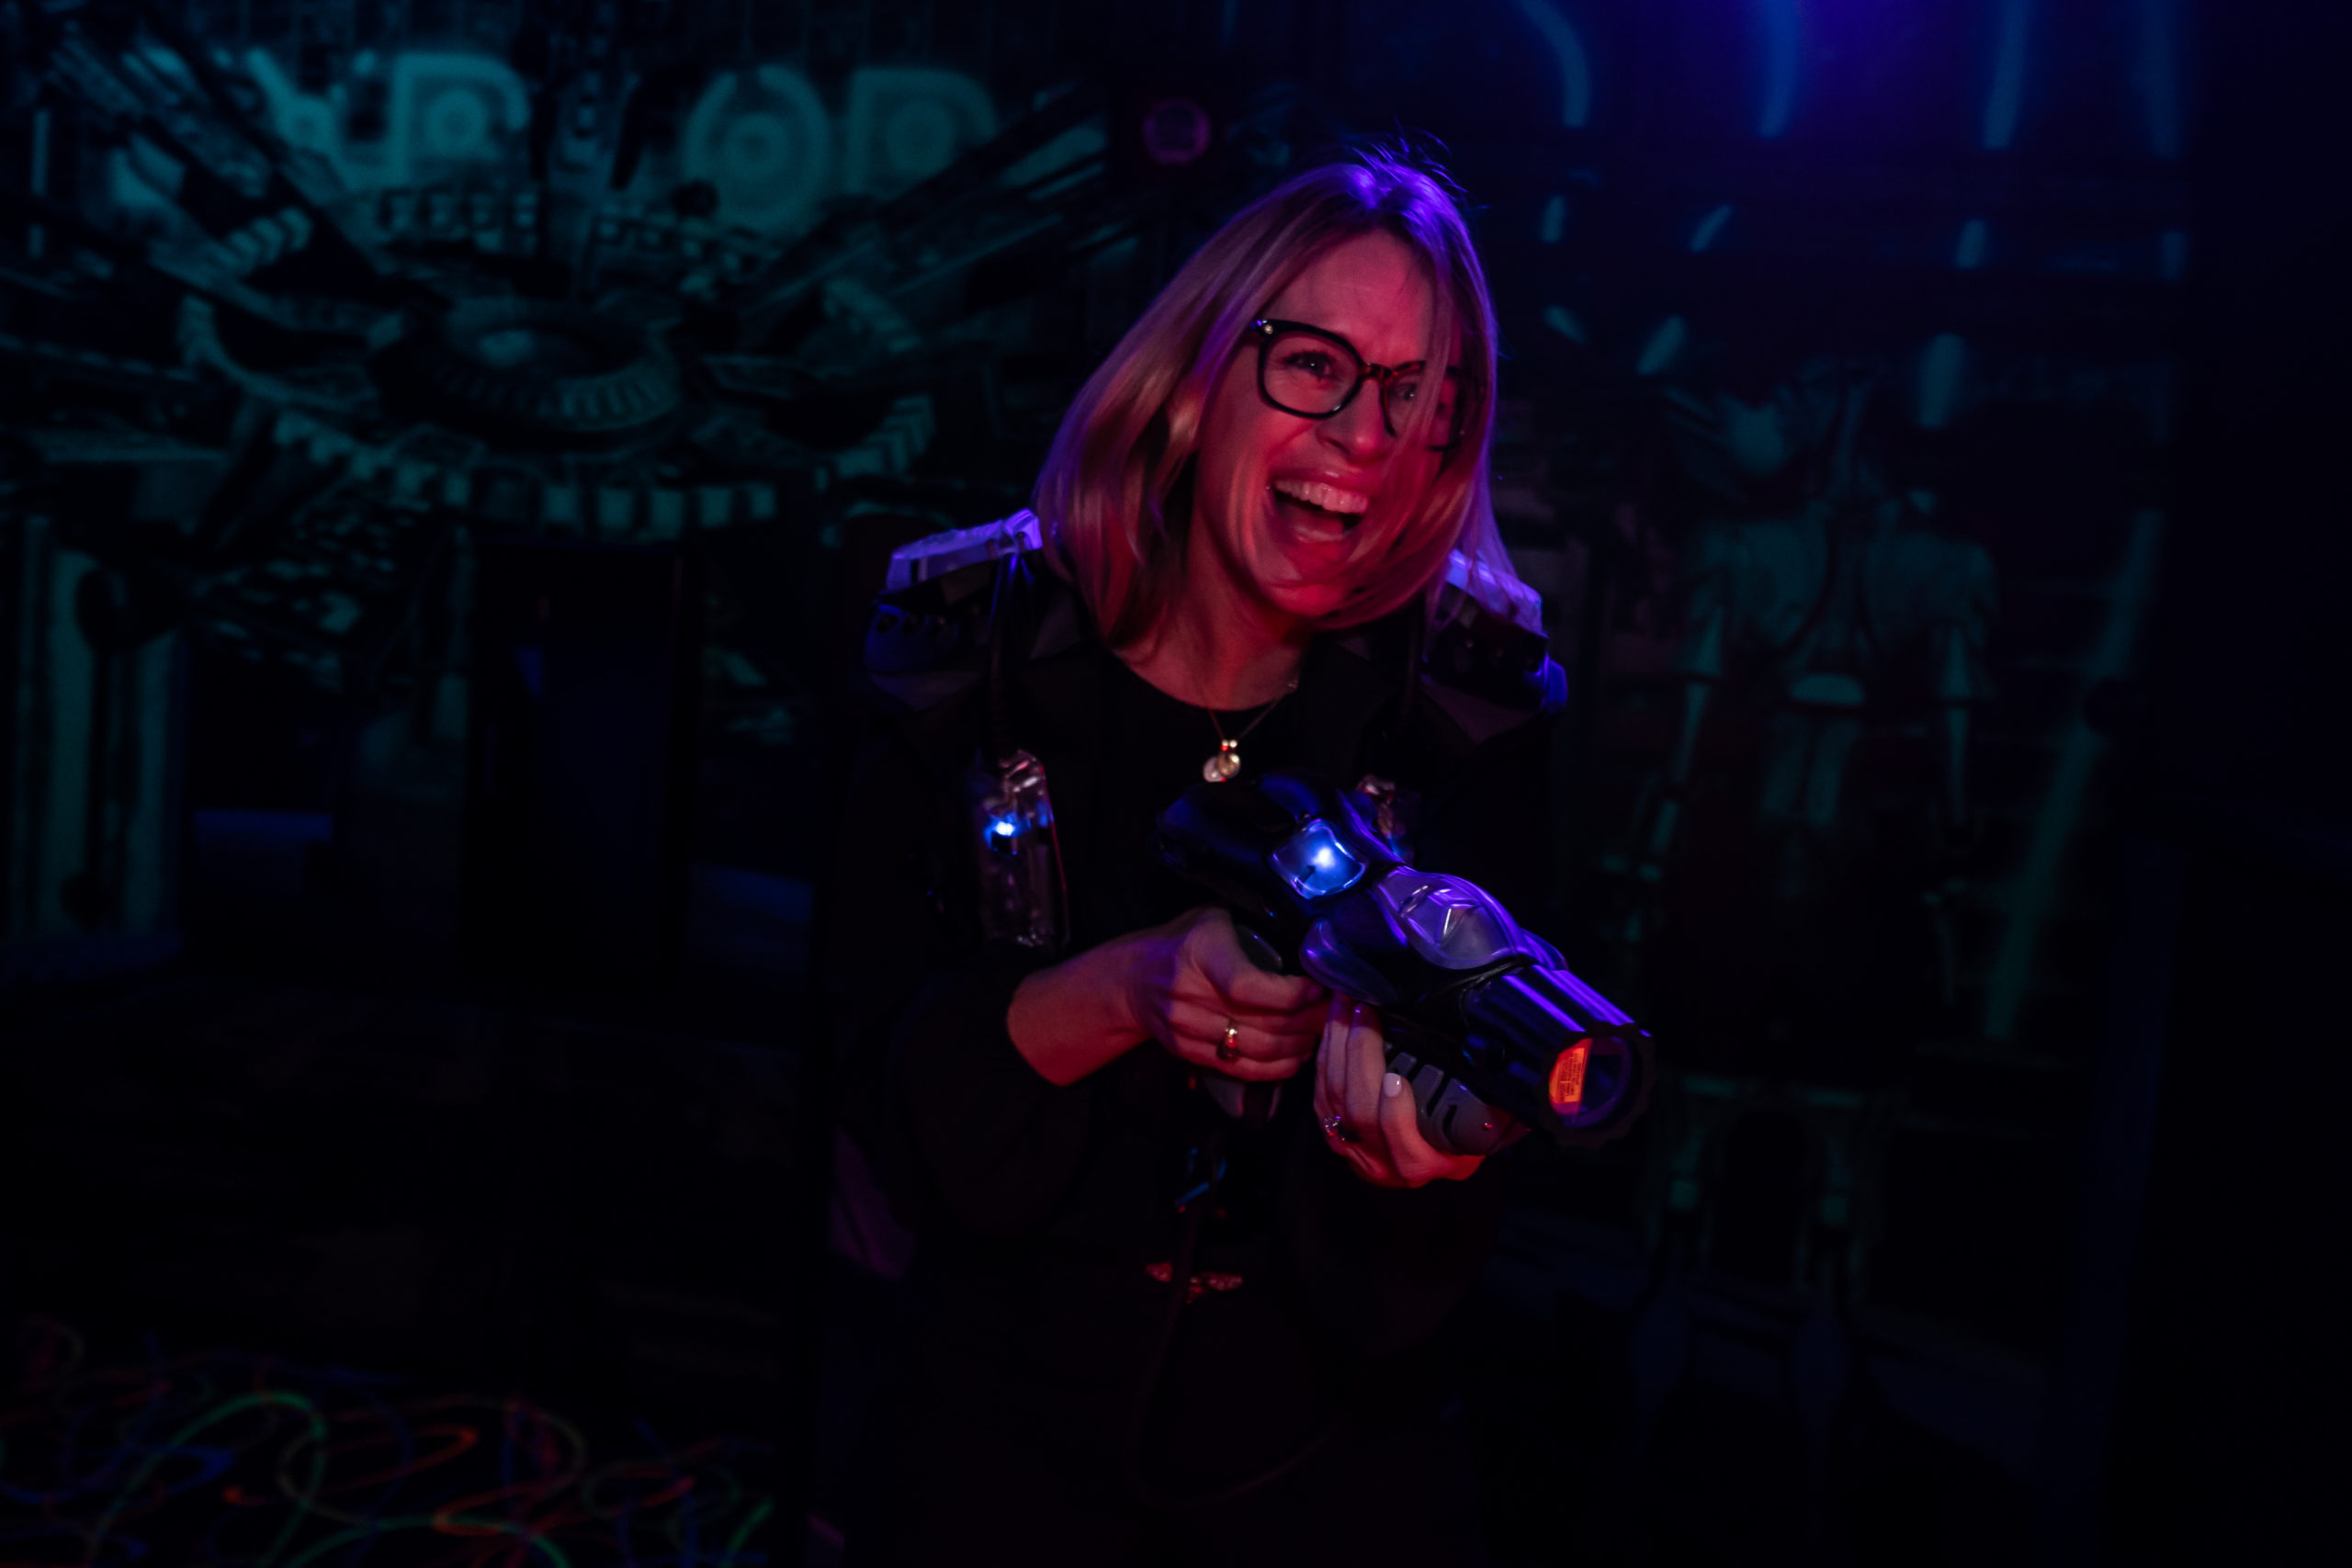 X-Site Laser Tag & Games